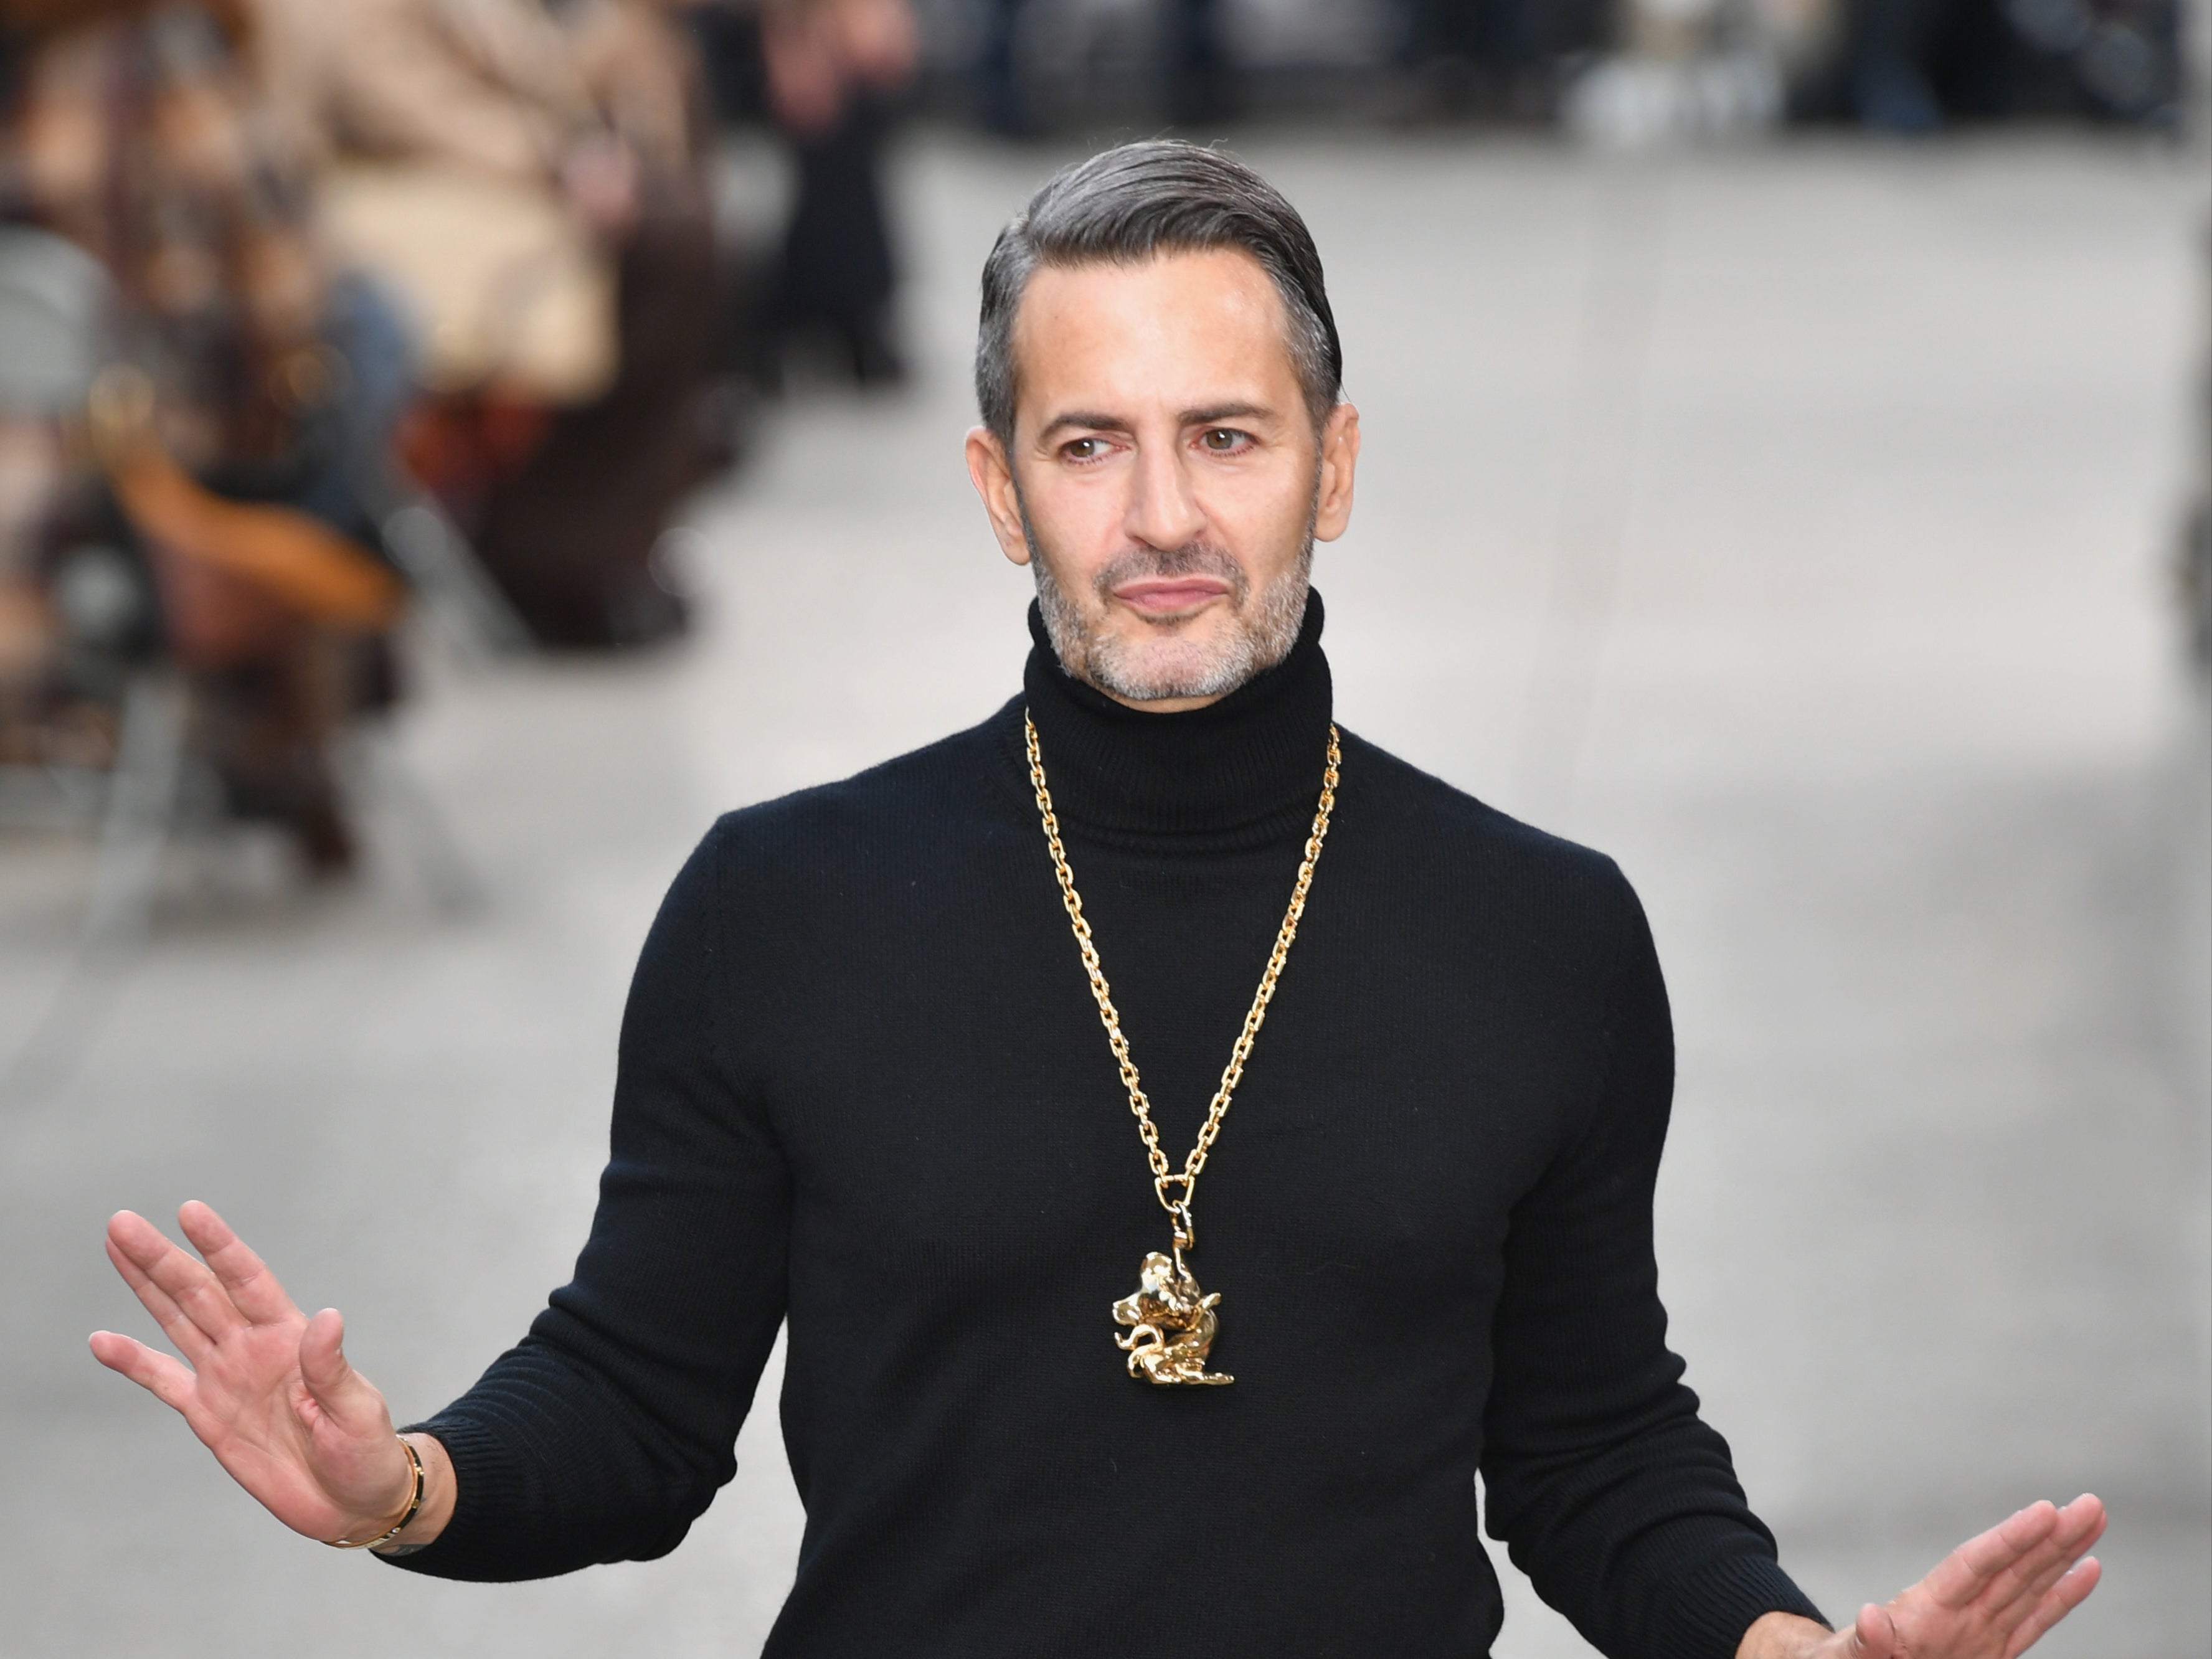 Marc Jacobs shares photo of himself after facelift